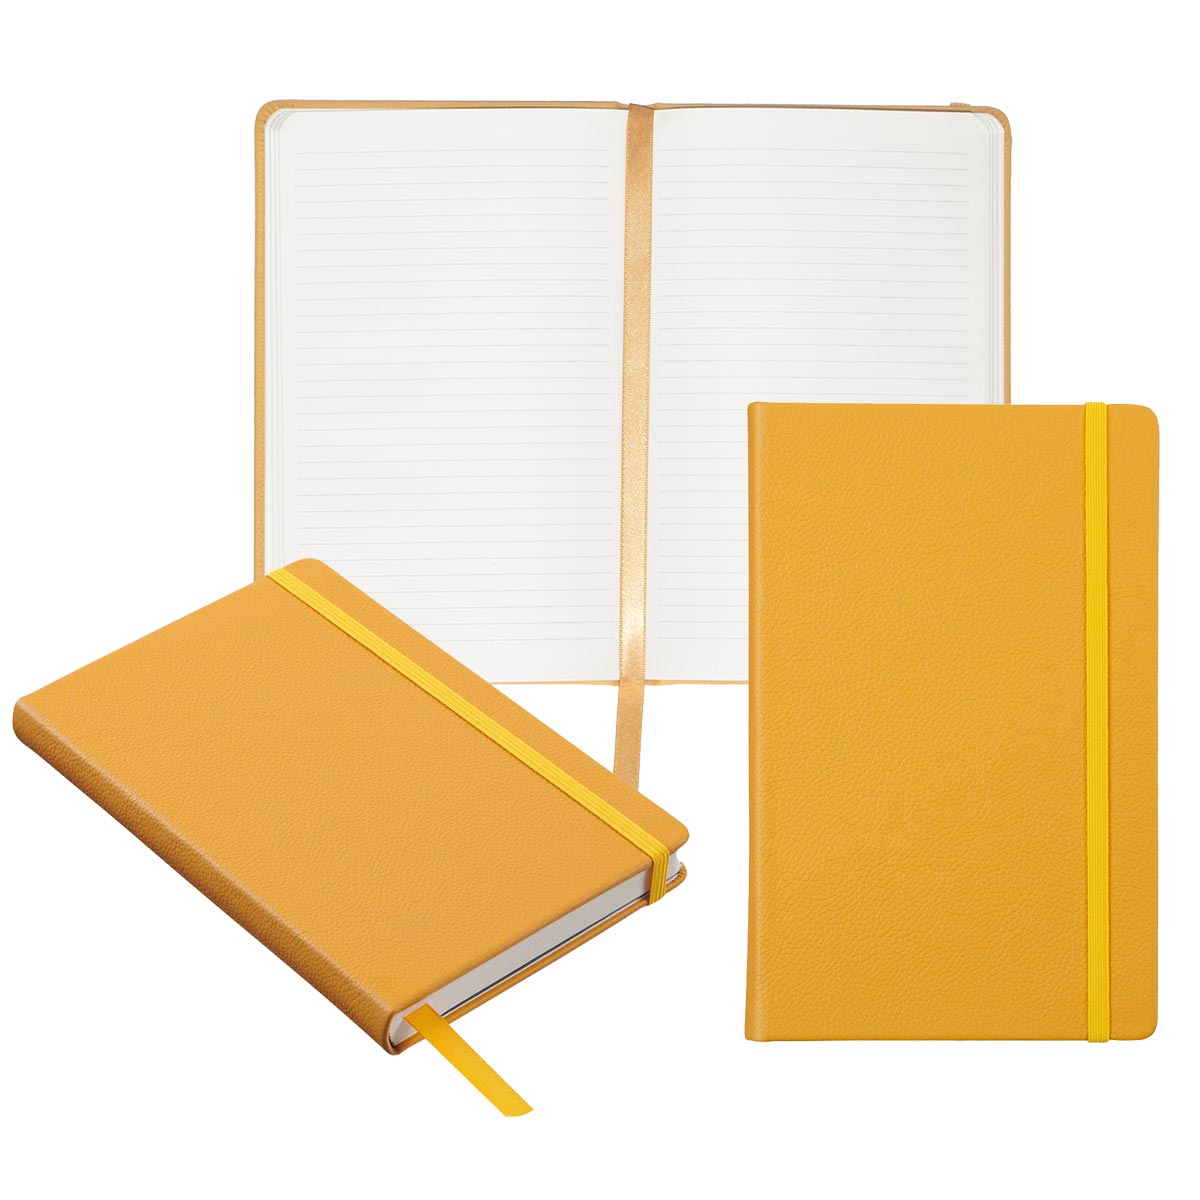 Three view collage of the Butter Yellow notebook, open with ribbon marker, front view, and diagonal closed view of binding and lower edge of notebook